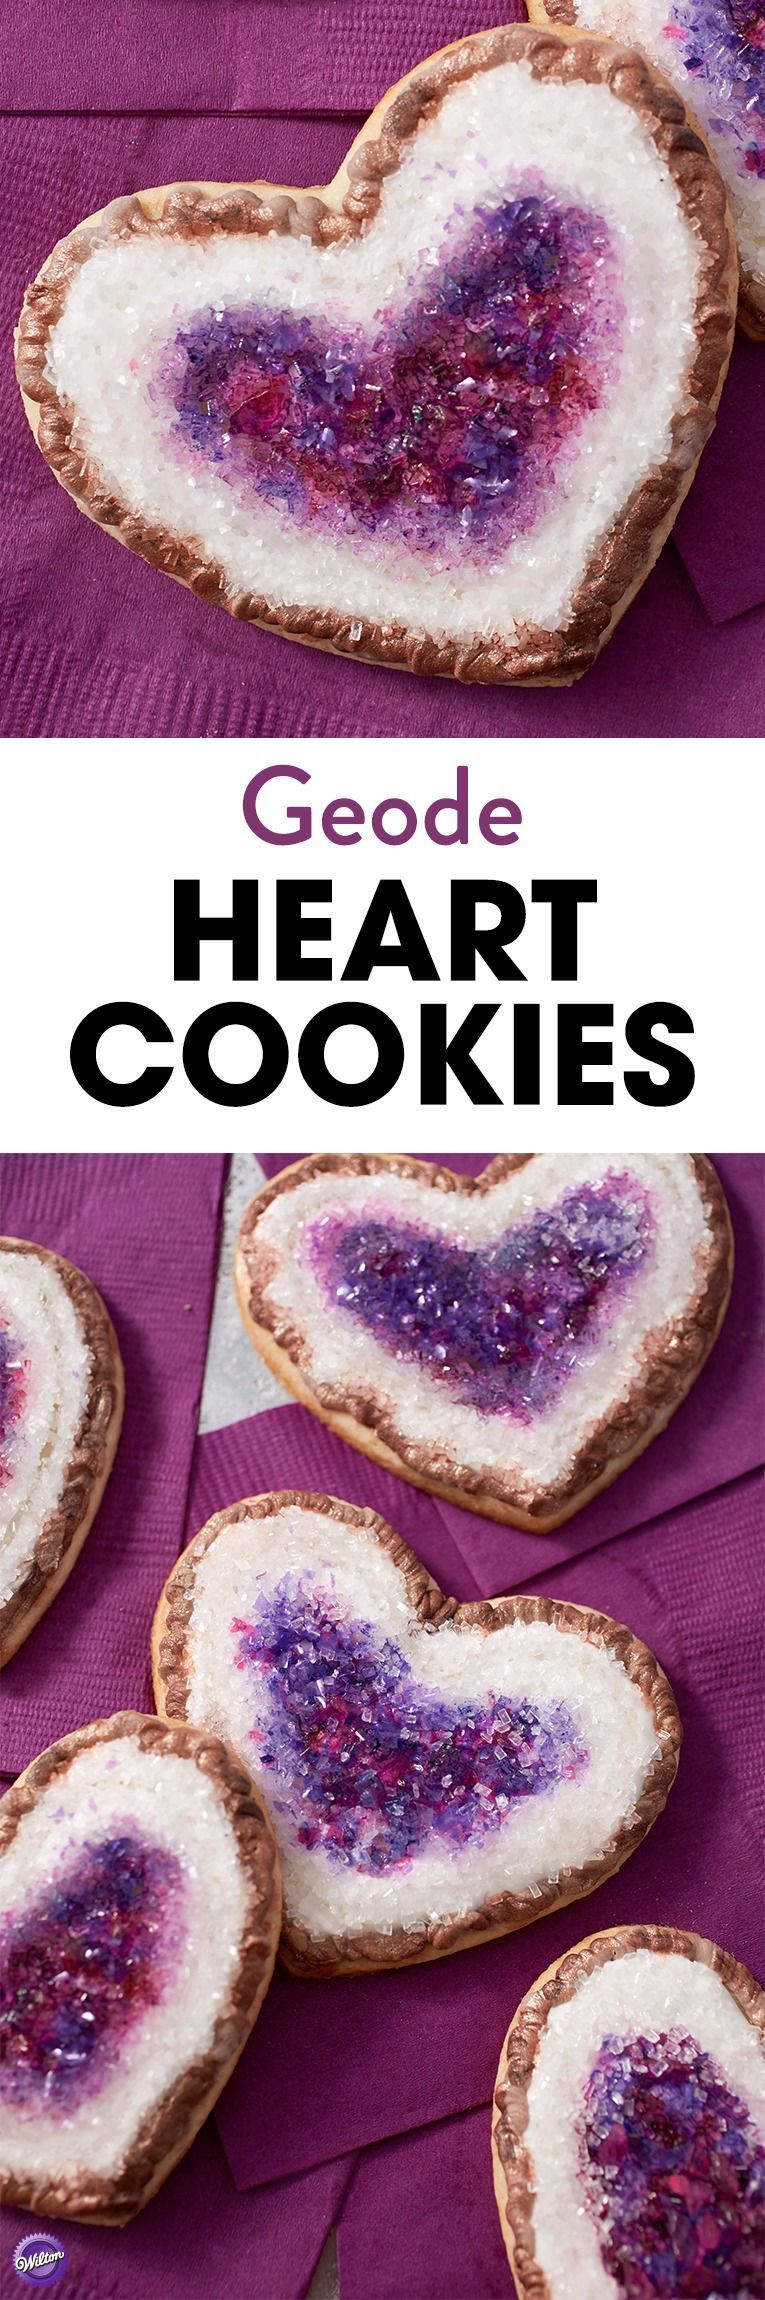 No need to go digging for diamonds…these Geode Heart Cookies will make your kitchen sparkle and shine! Made using colorful rock